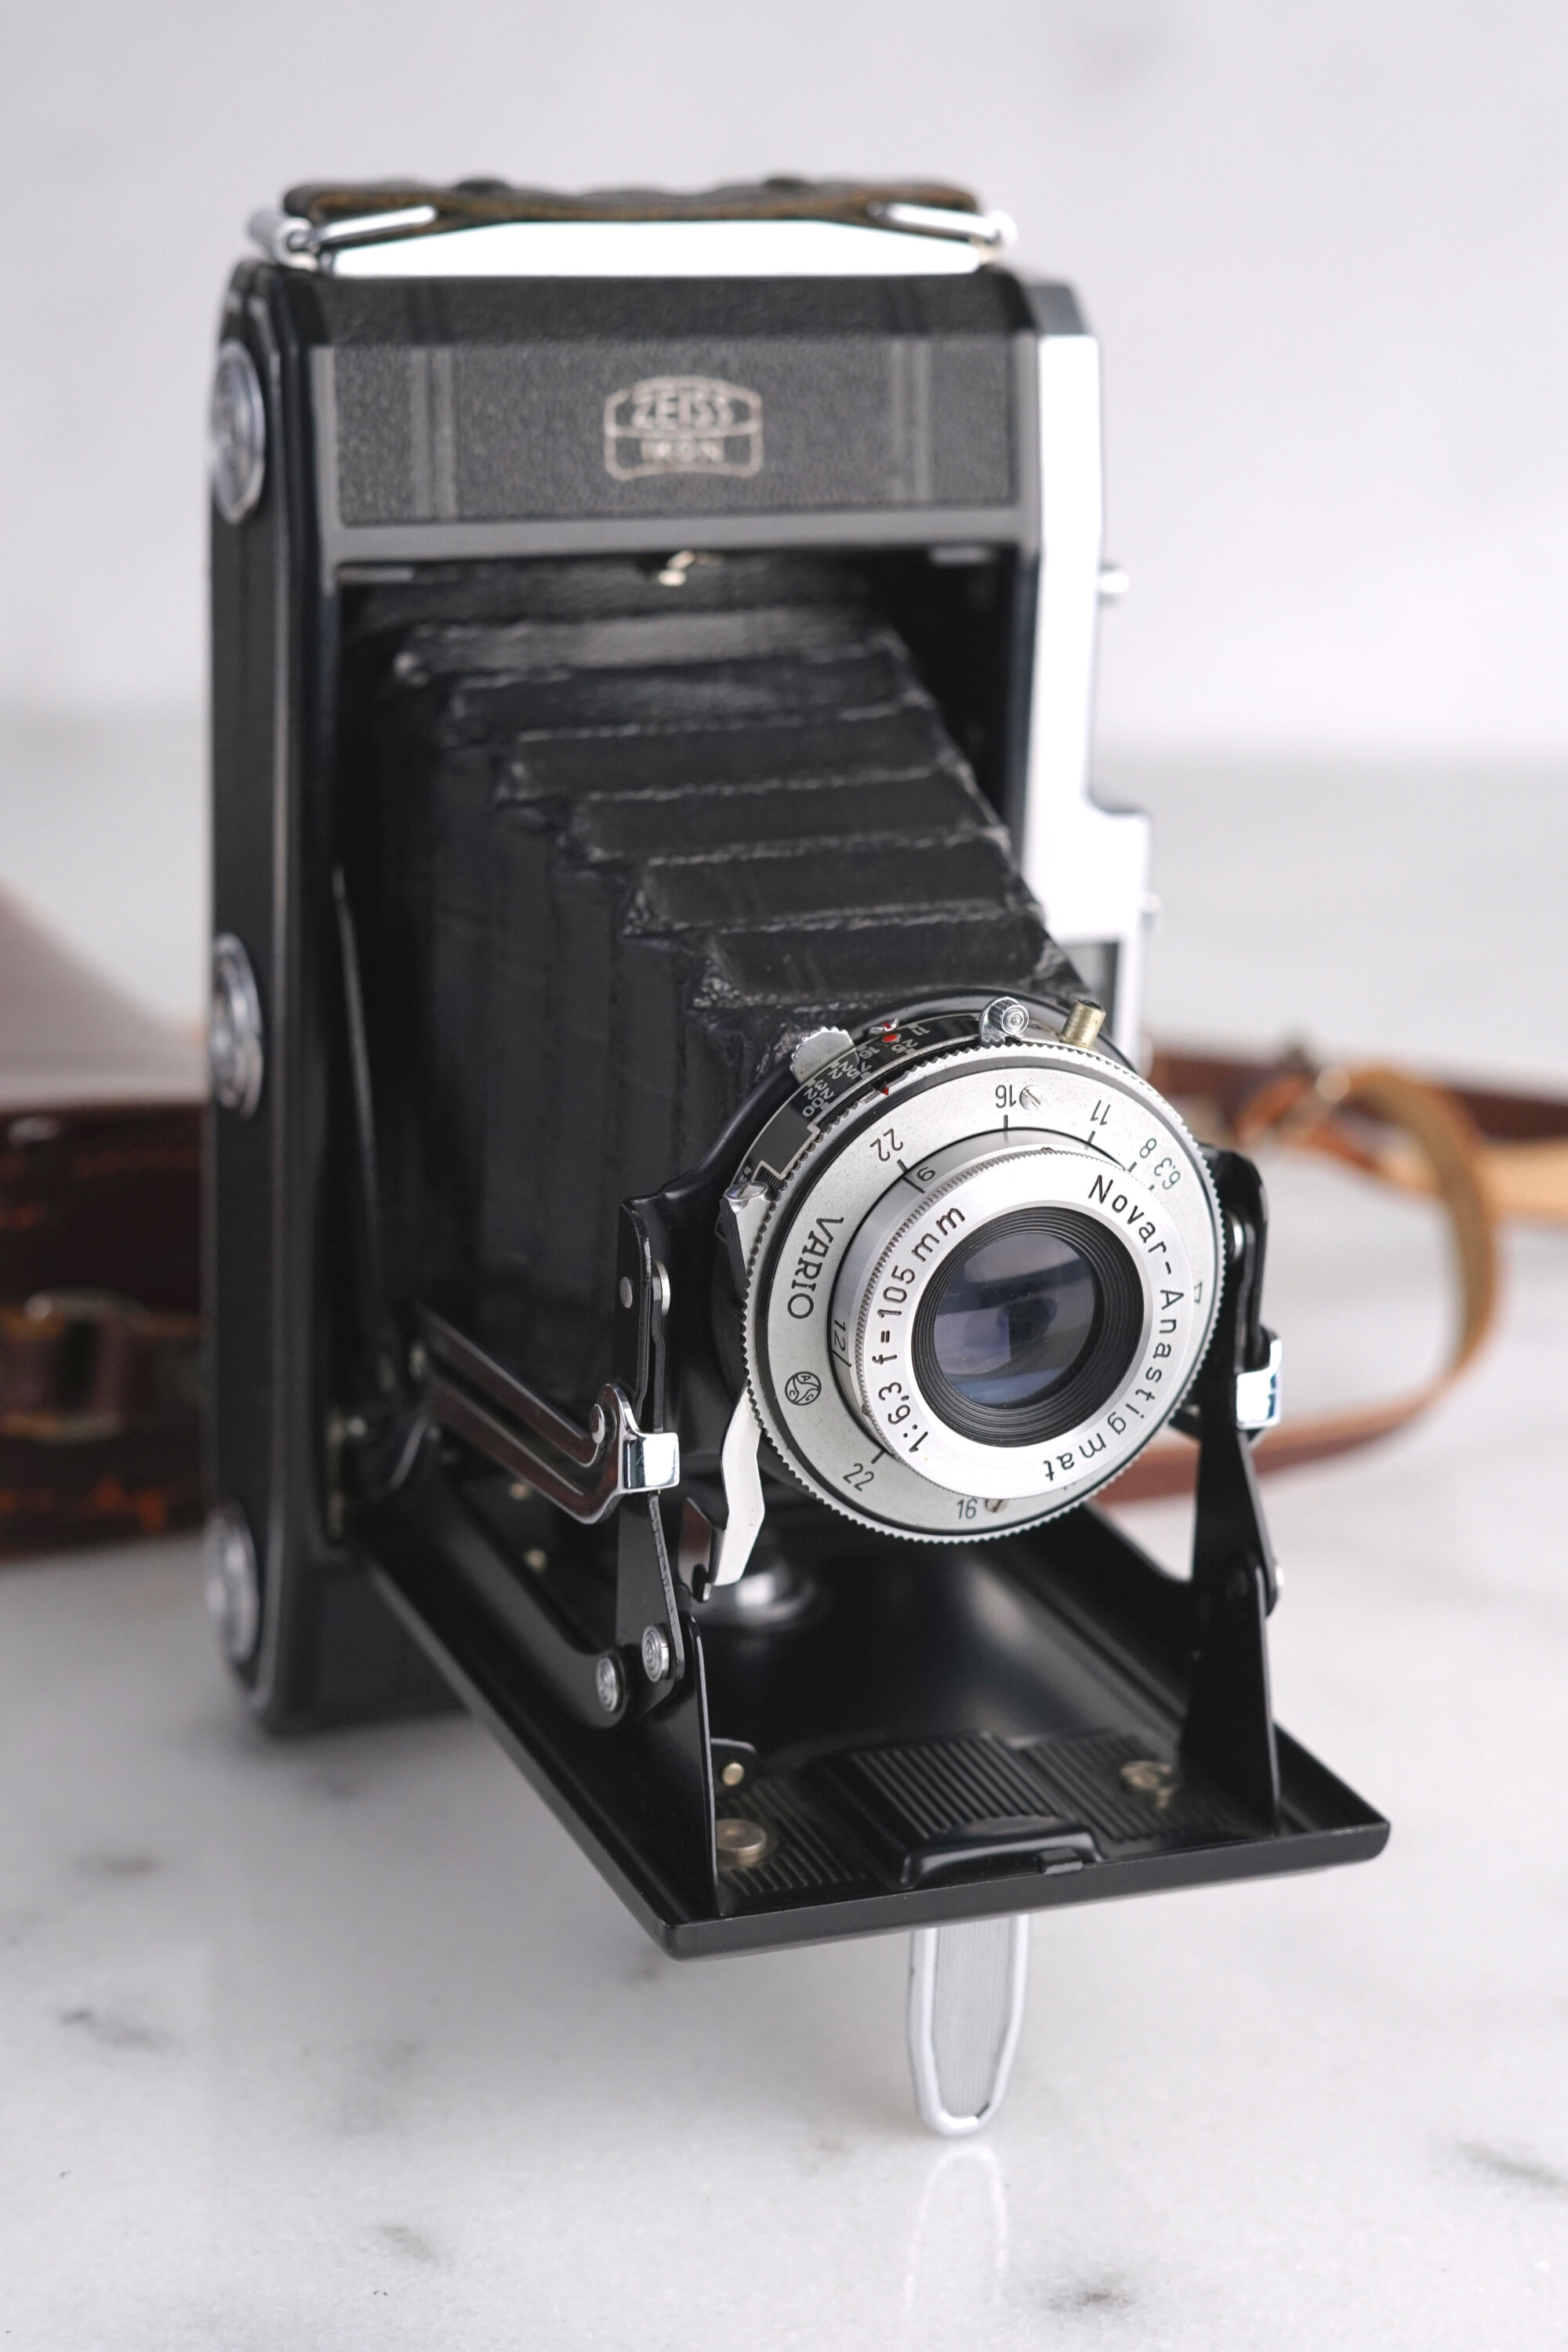 Zeiss Ikon 4372 collapsible viewfinder for 6x9cm Ikonta & Nettar cameras View Finder